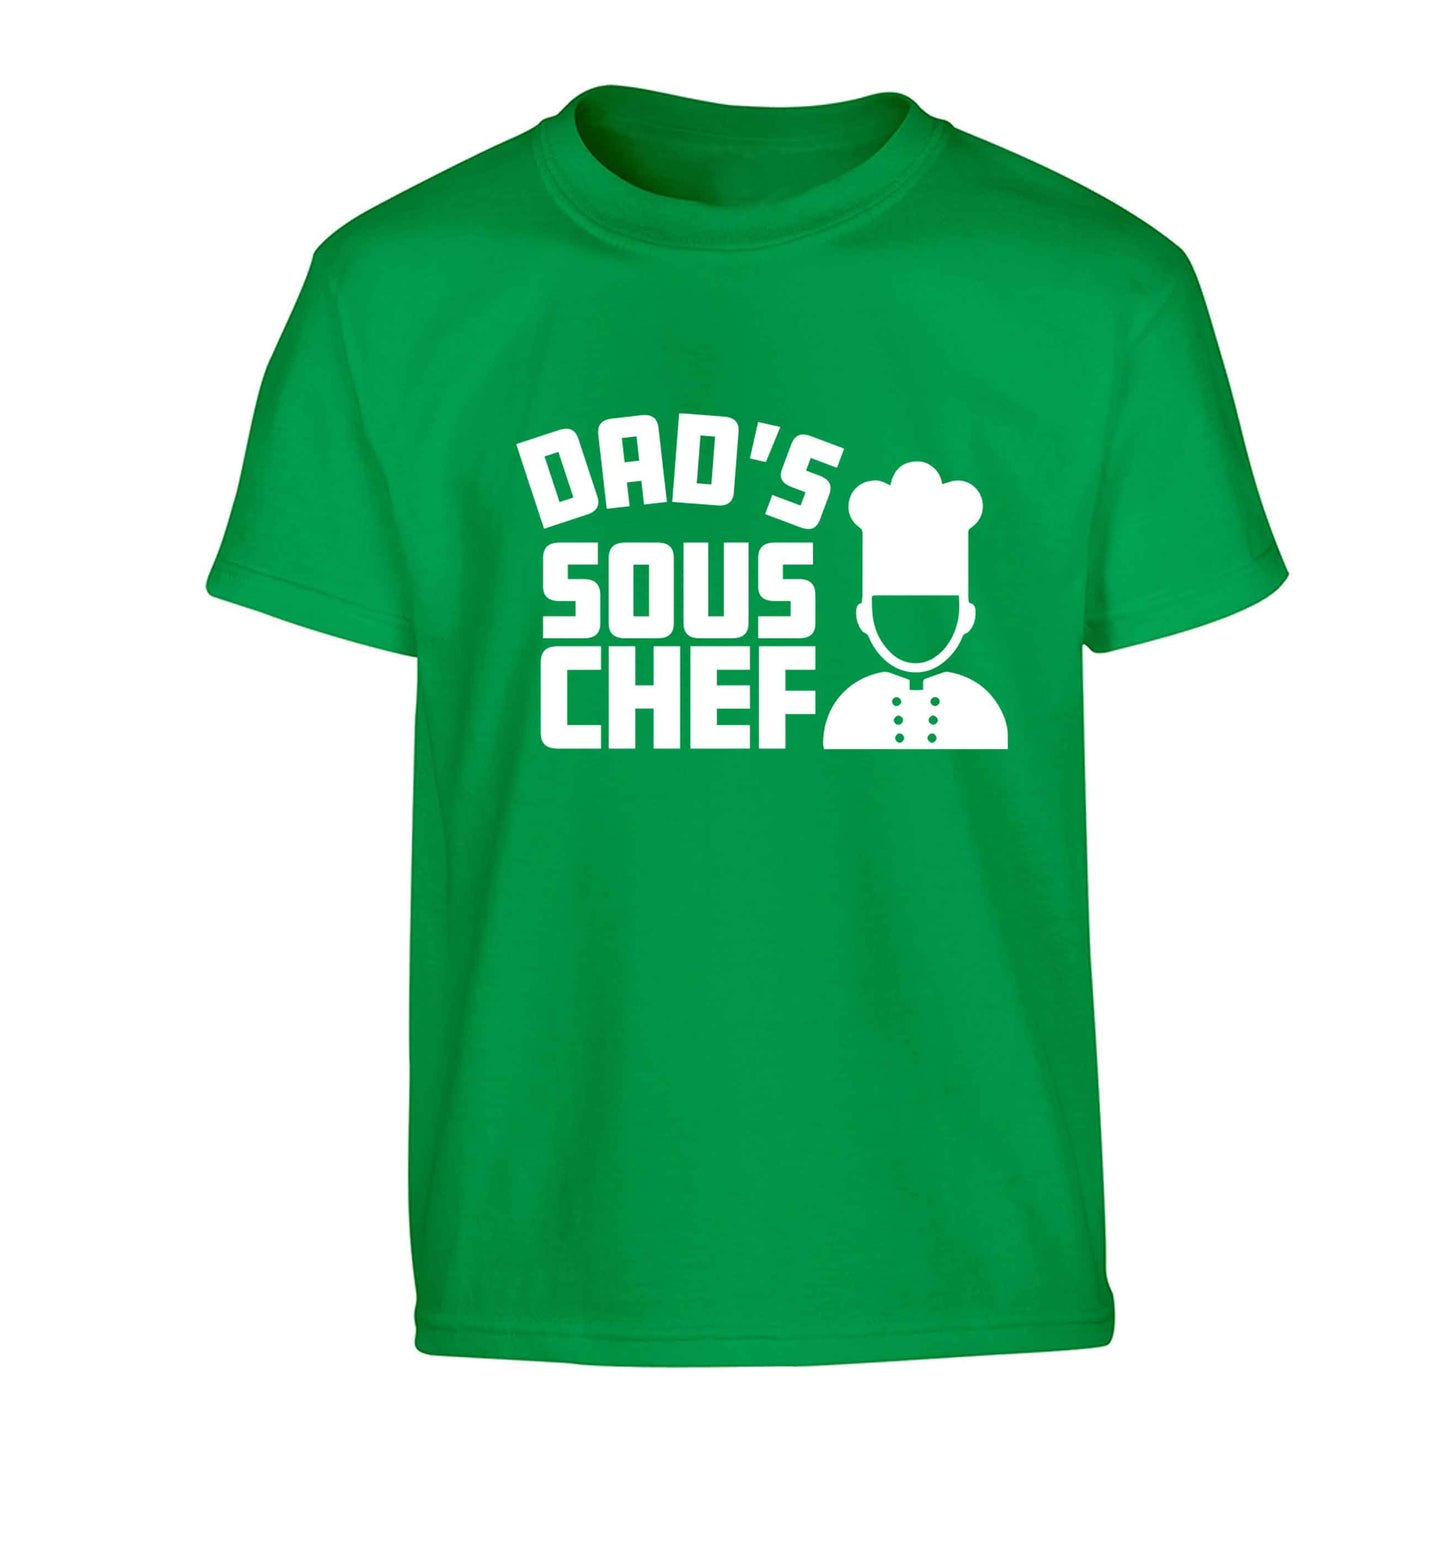 Dad's sous chef Children's green Tshirt 12-13 Years